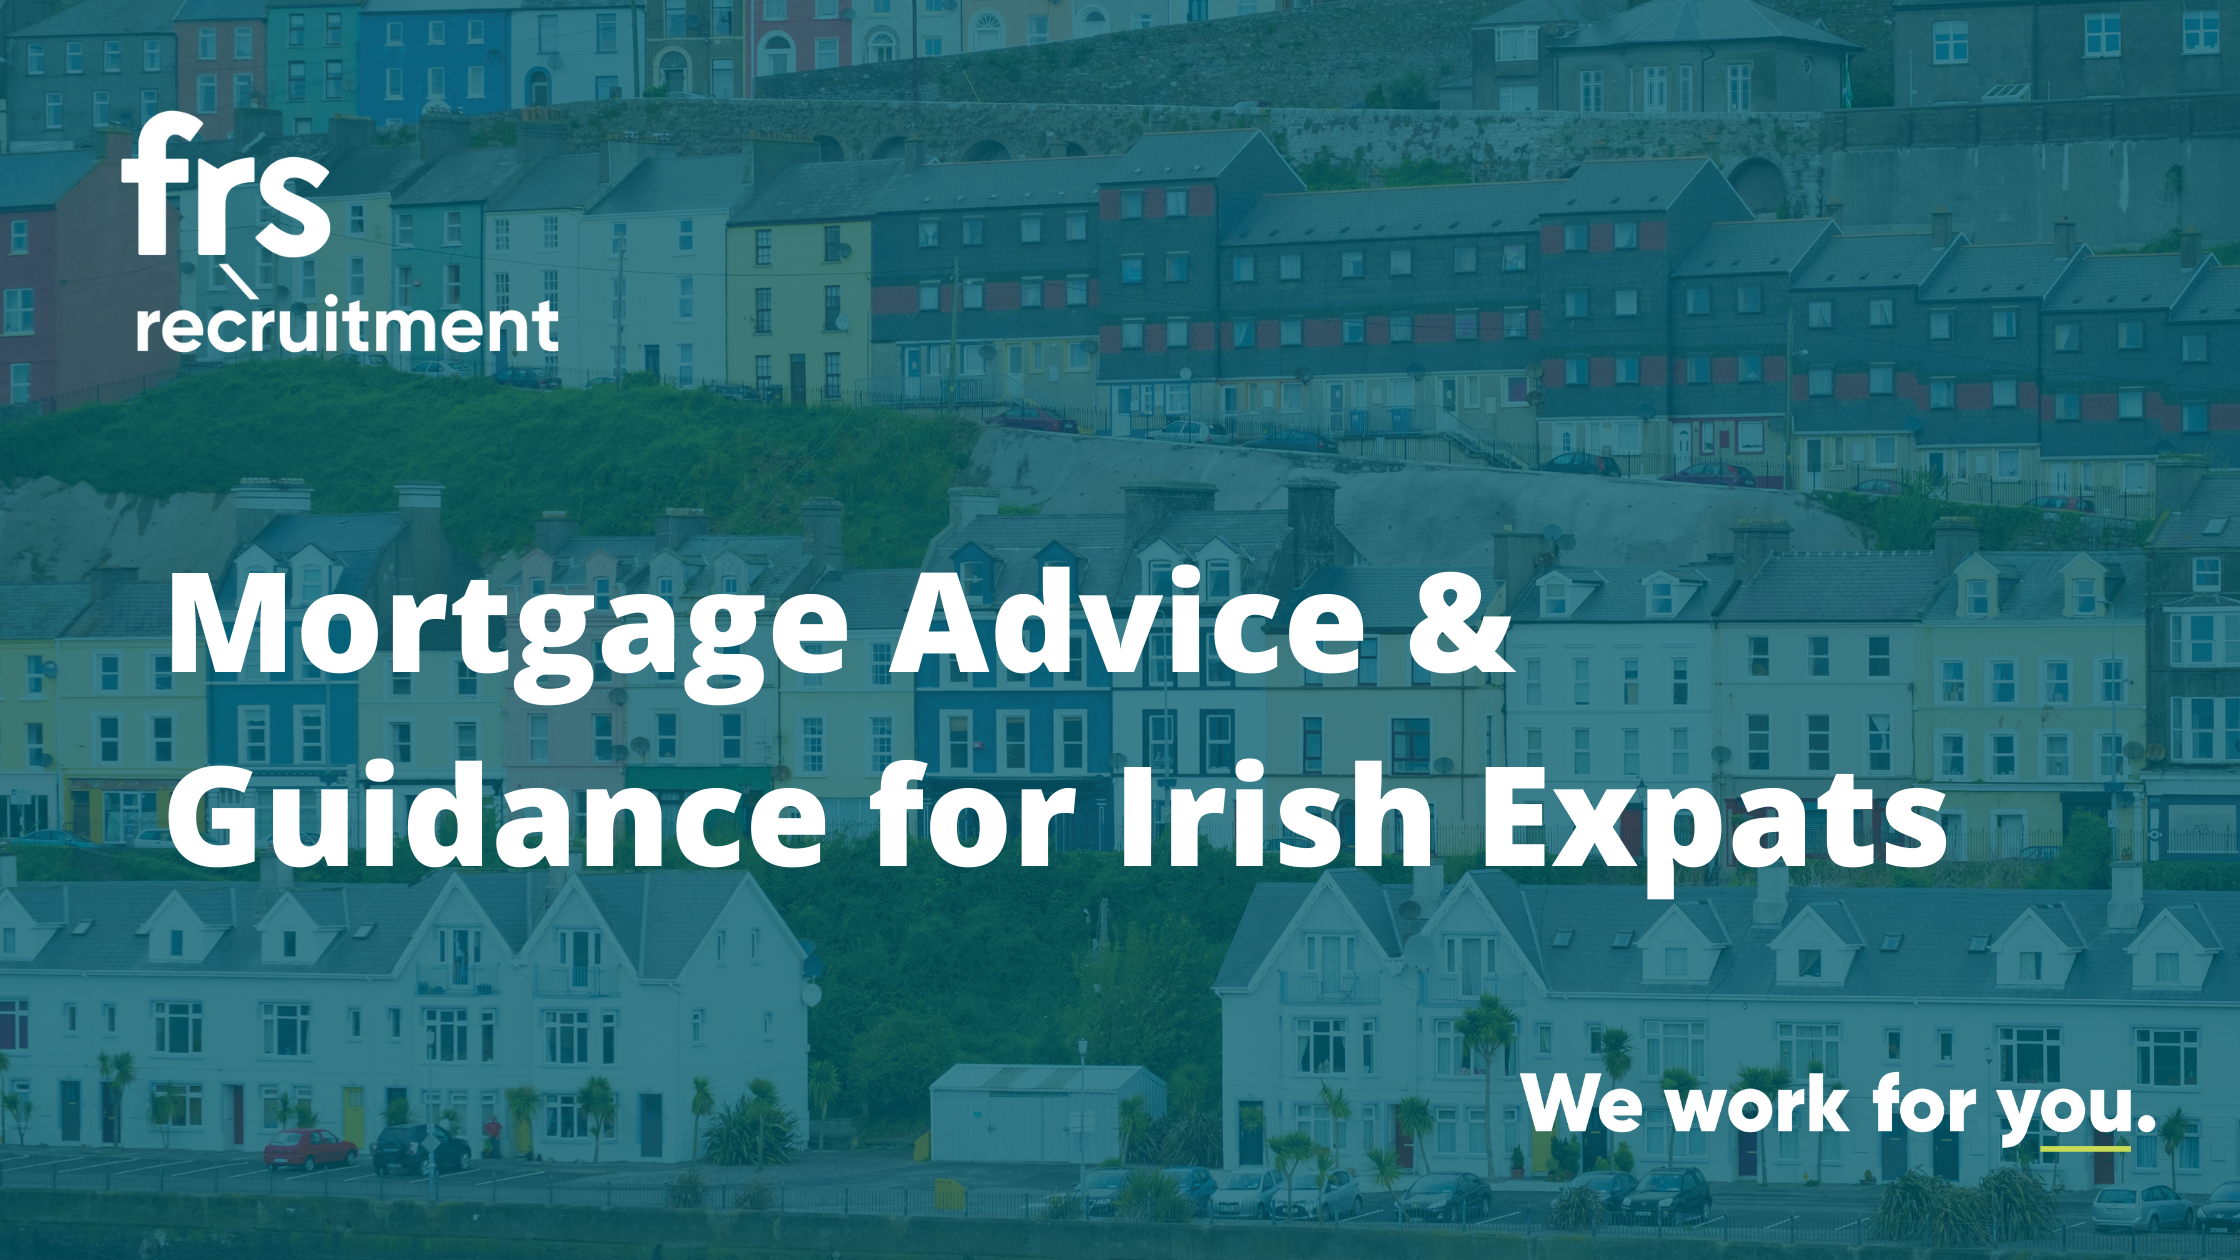 Mortgage Advice & Guidance for Irish Expats